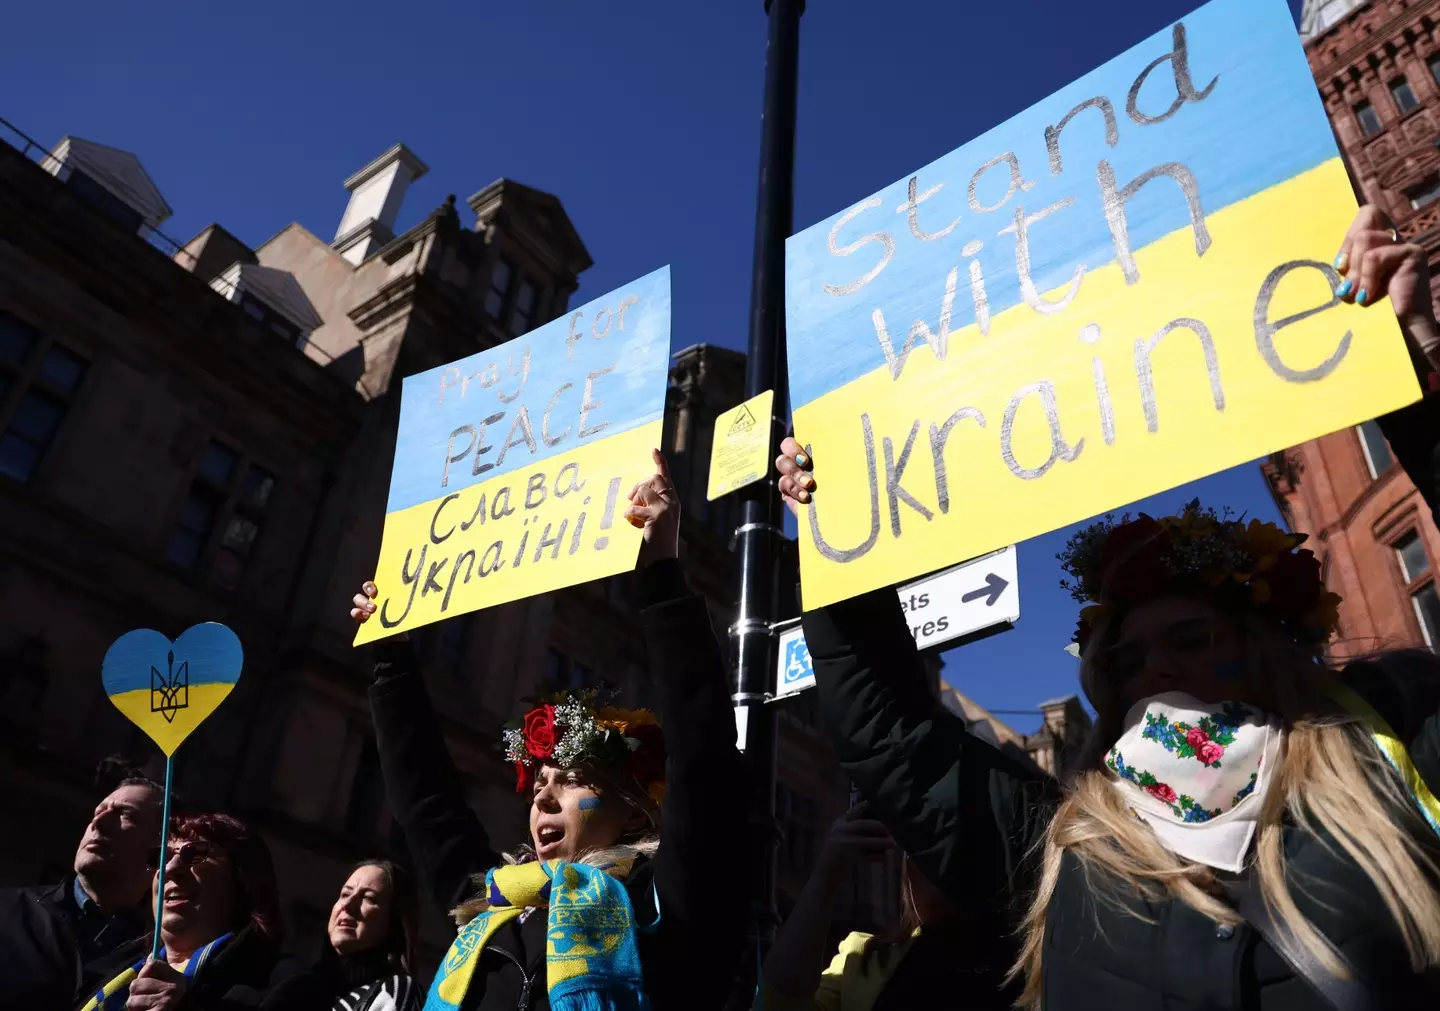 Millions have rallied behind Ukraine during Russia's 'special military operation' on the country.